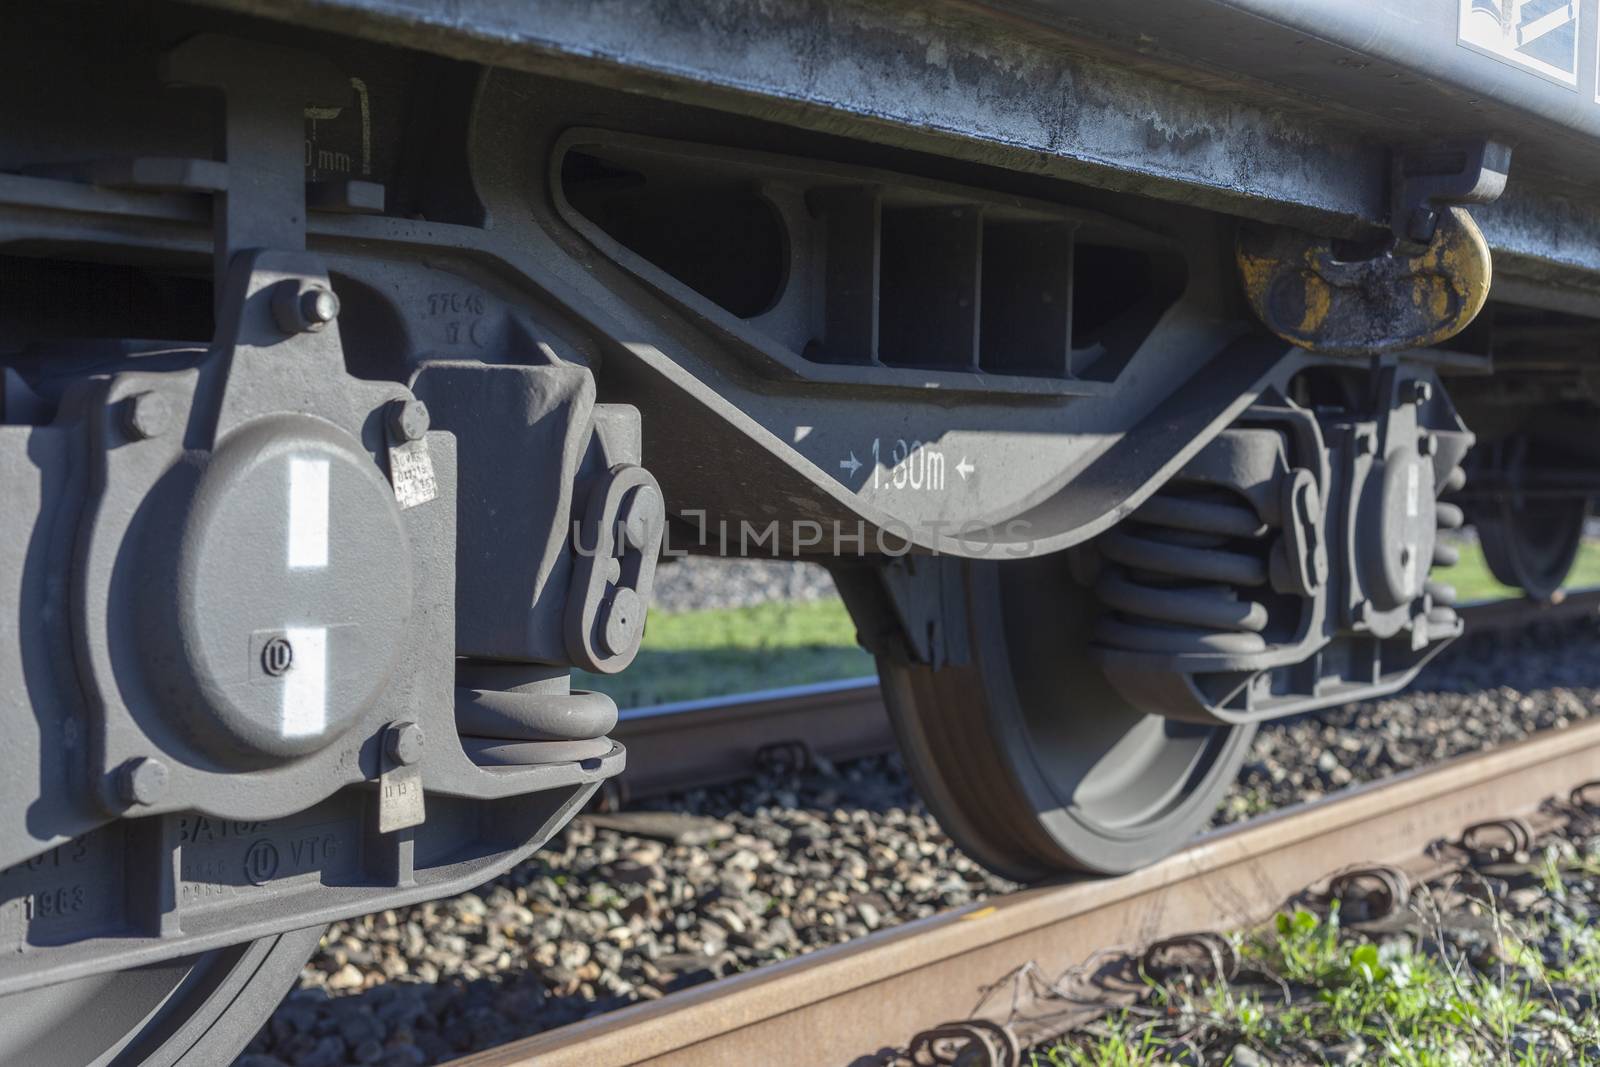 A closeup view of the wheels of a train by Tjeerdkruse